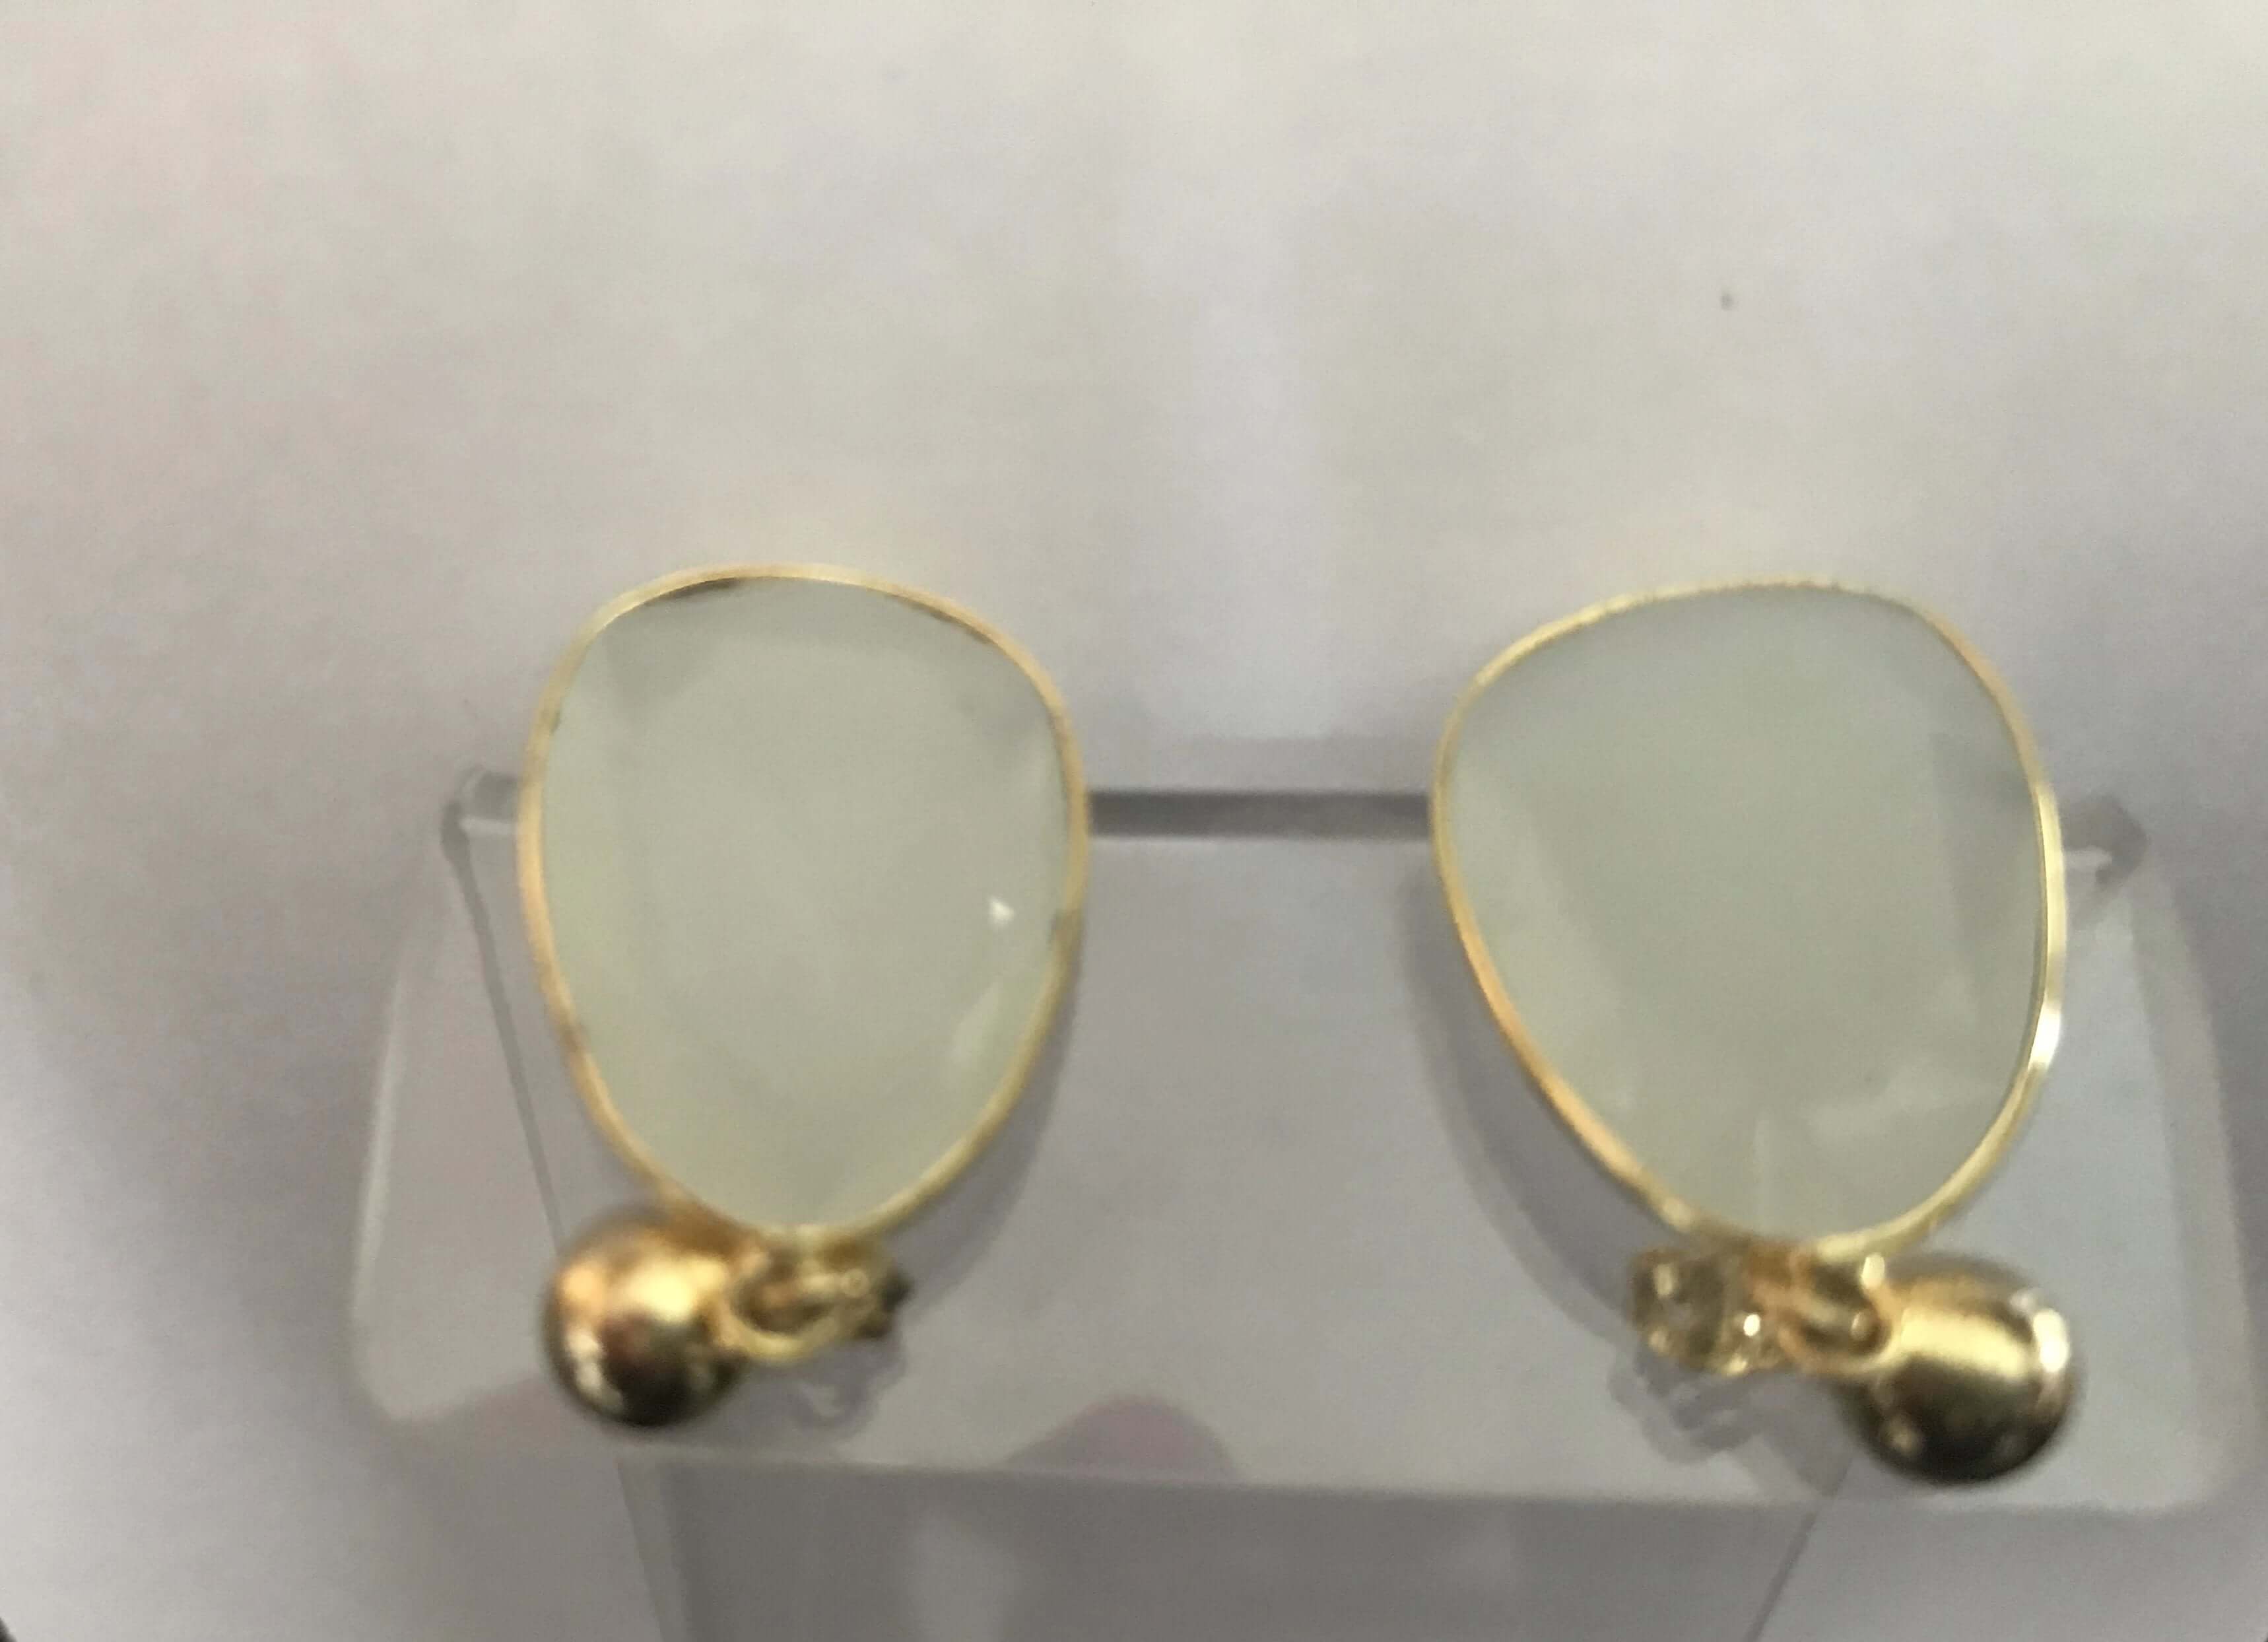 24K Gold Translucent White Chalcedony Round Ball Large Drop Dangle Earrings - Shop Thrifty Treasures